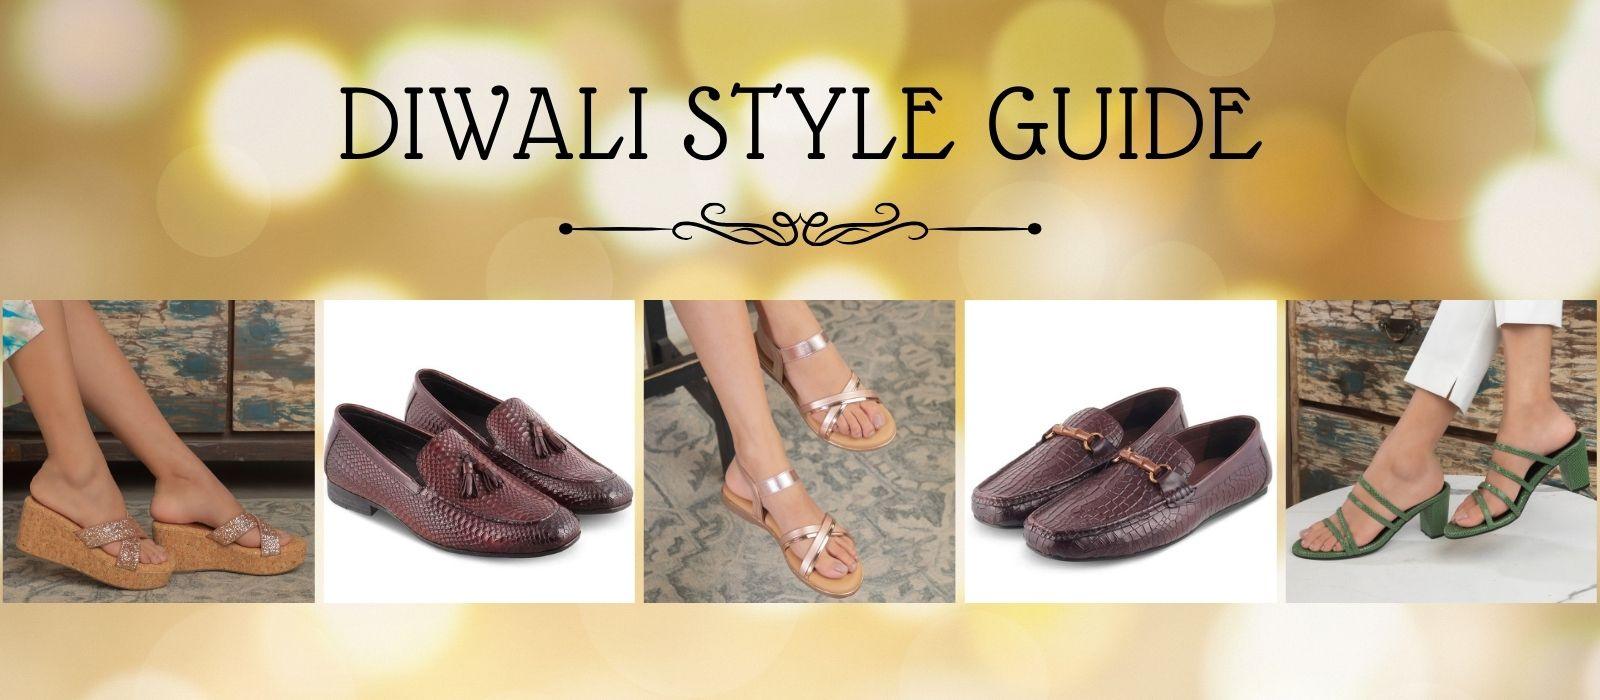 Diwali Style Guide: Choosing the Perfect Footwear for Men and Women - Tresmode